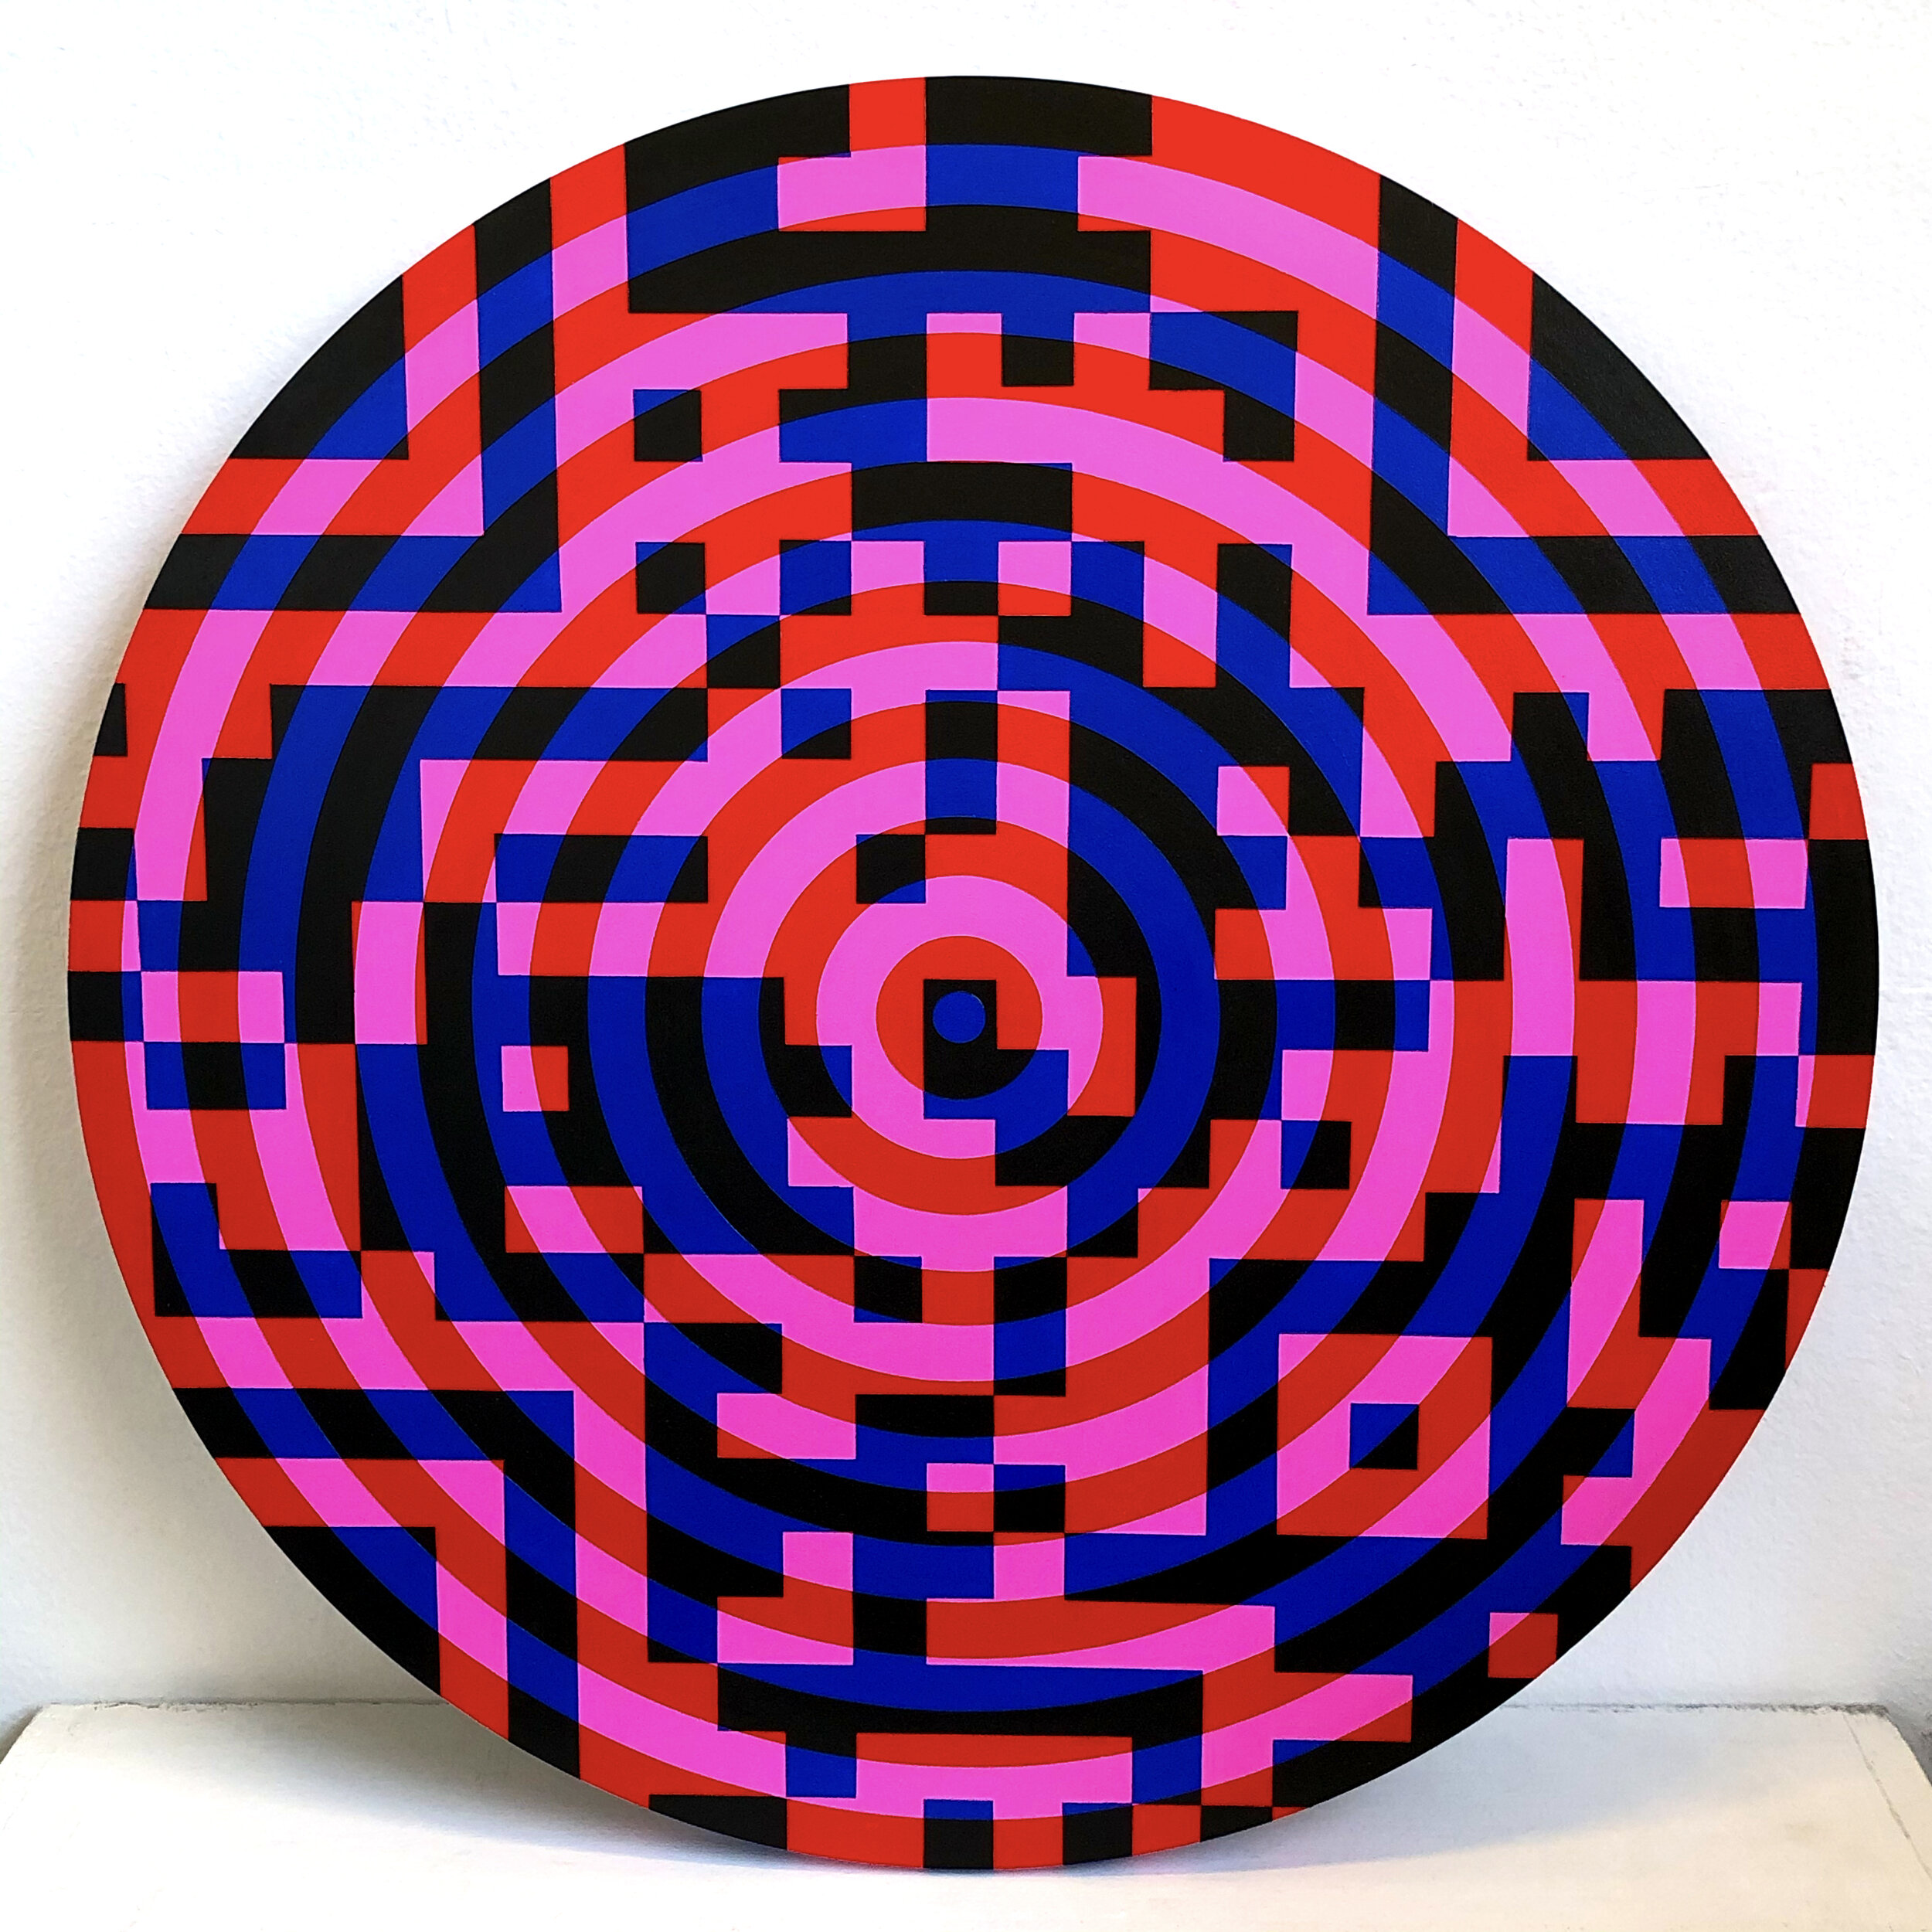 'Check In To 2021', acrylic on wooden panel (60cm diameter)